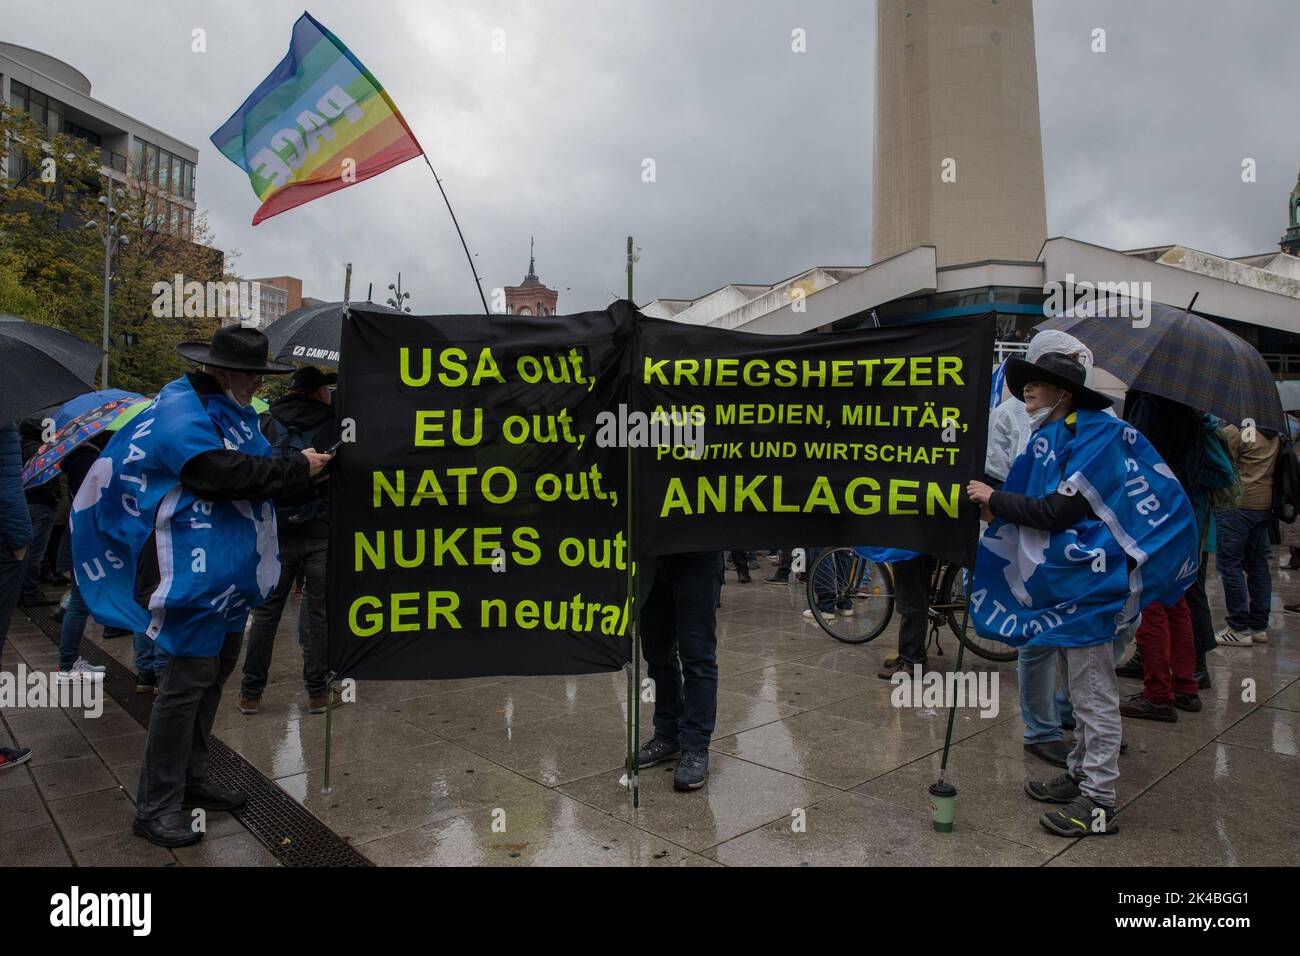 Berlin, Germany. 01st Oct, 2022. Protesters at a rally, which took place at the television tower in Berlin, on October 1, 2022. Employees of craft companies, as well as right-wing extremist activists, gathered at the rally. They demanded an immediate end to sanctions against Russia, called the U.S. a warmonger, and called for withdrawal from NATO and the entire government's resignation. (Photo by Michael Kuenne/PRESSCOV/Sipa USA) Credit: Sipa USA/Alamy Live News Stock Photo